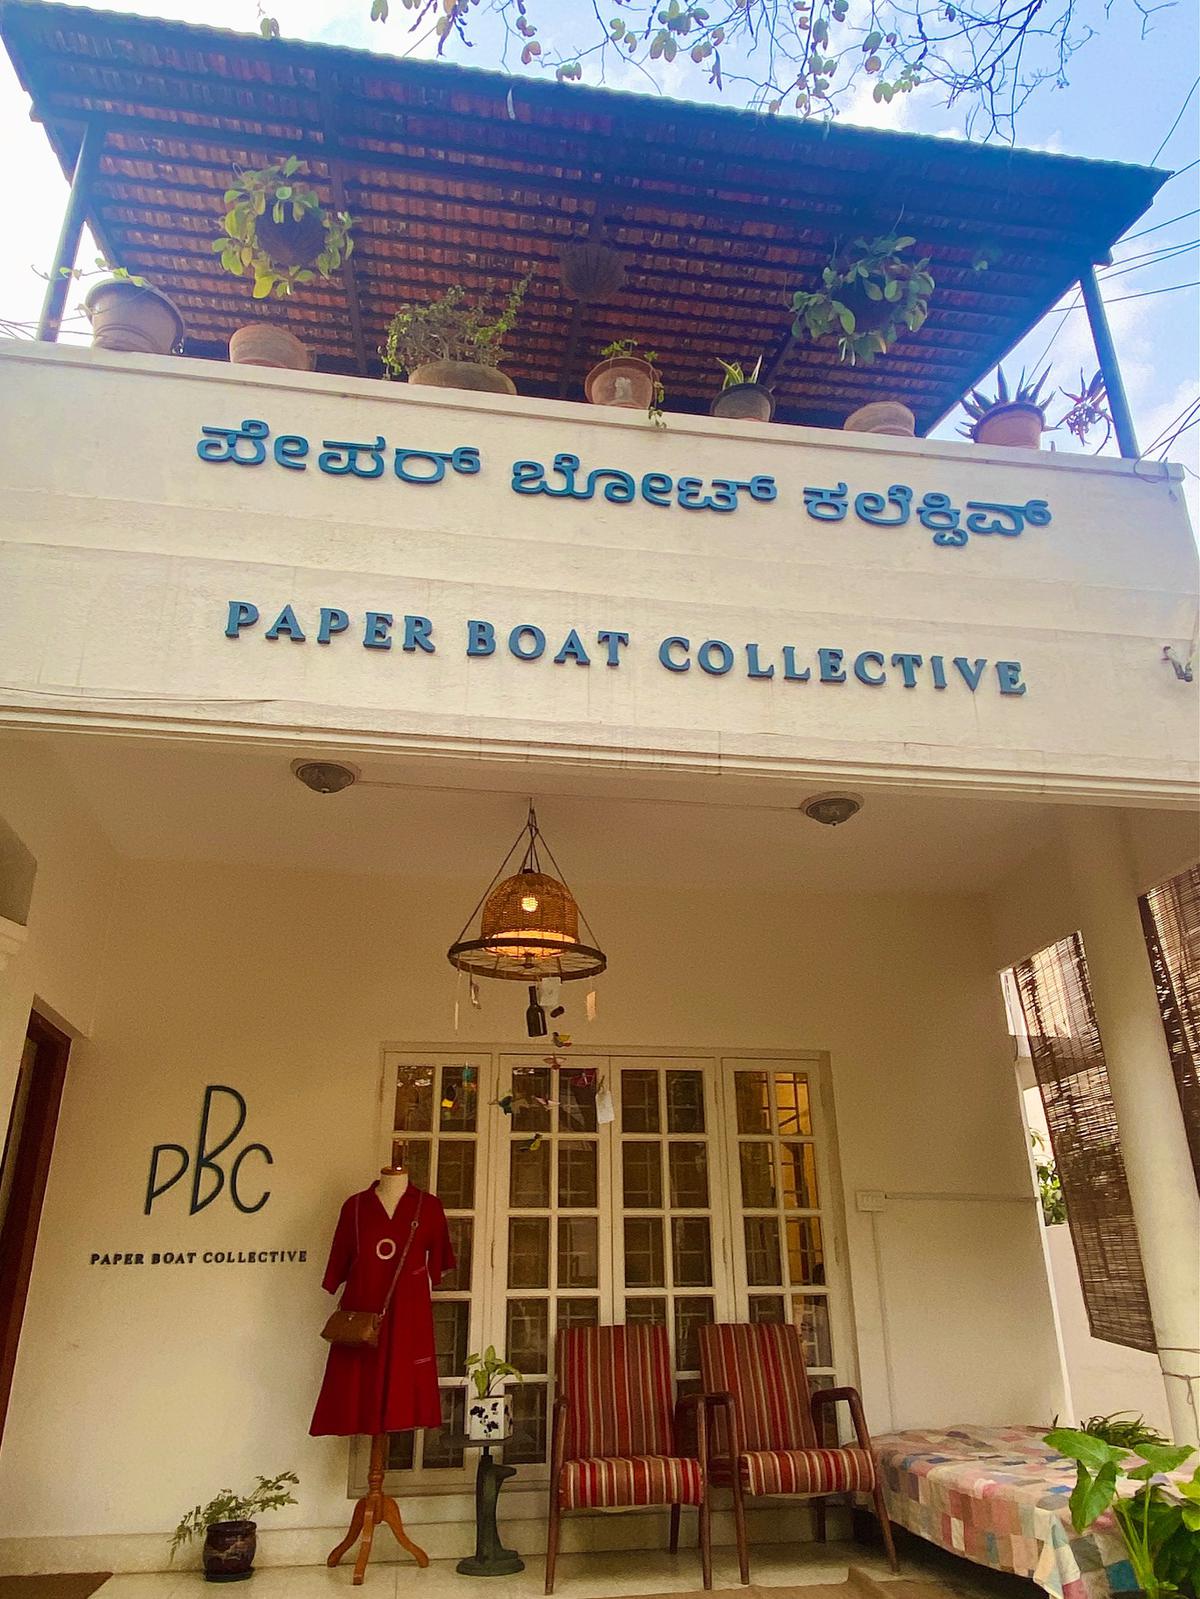 Â The Paper Boat Collective (PBC) is a concept store with environmental consciousness, ethics and mindful production at its core